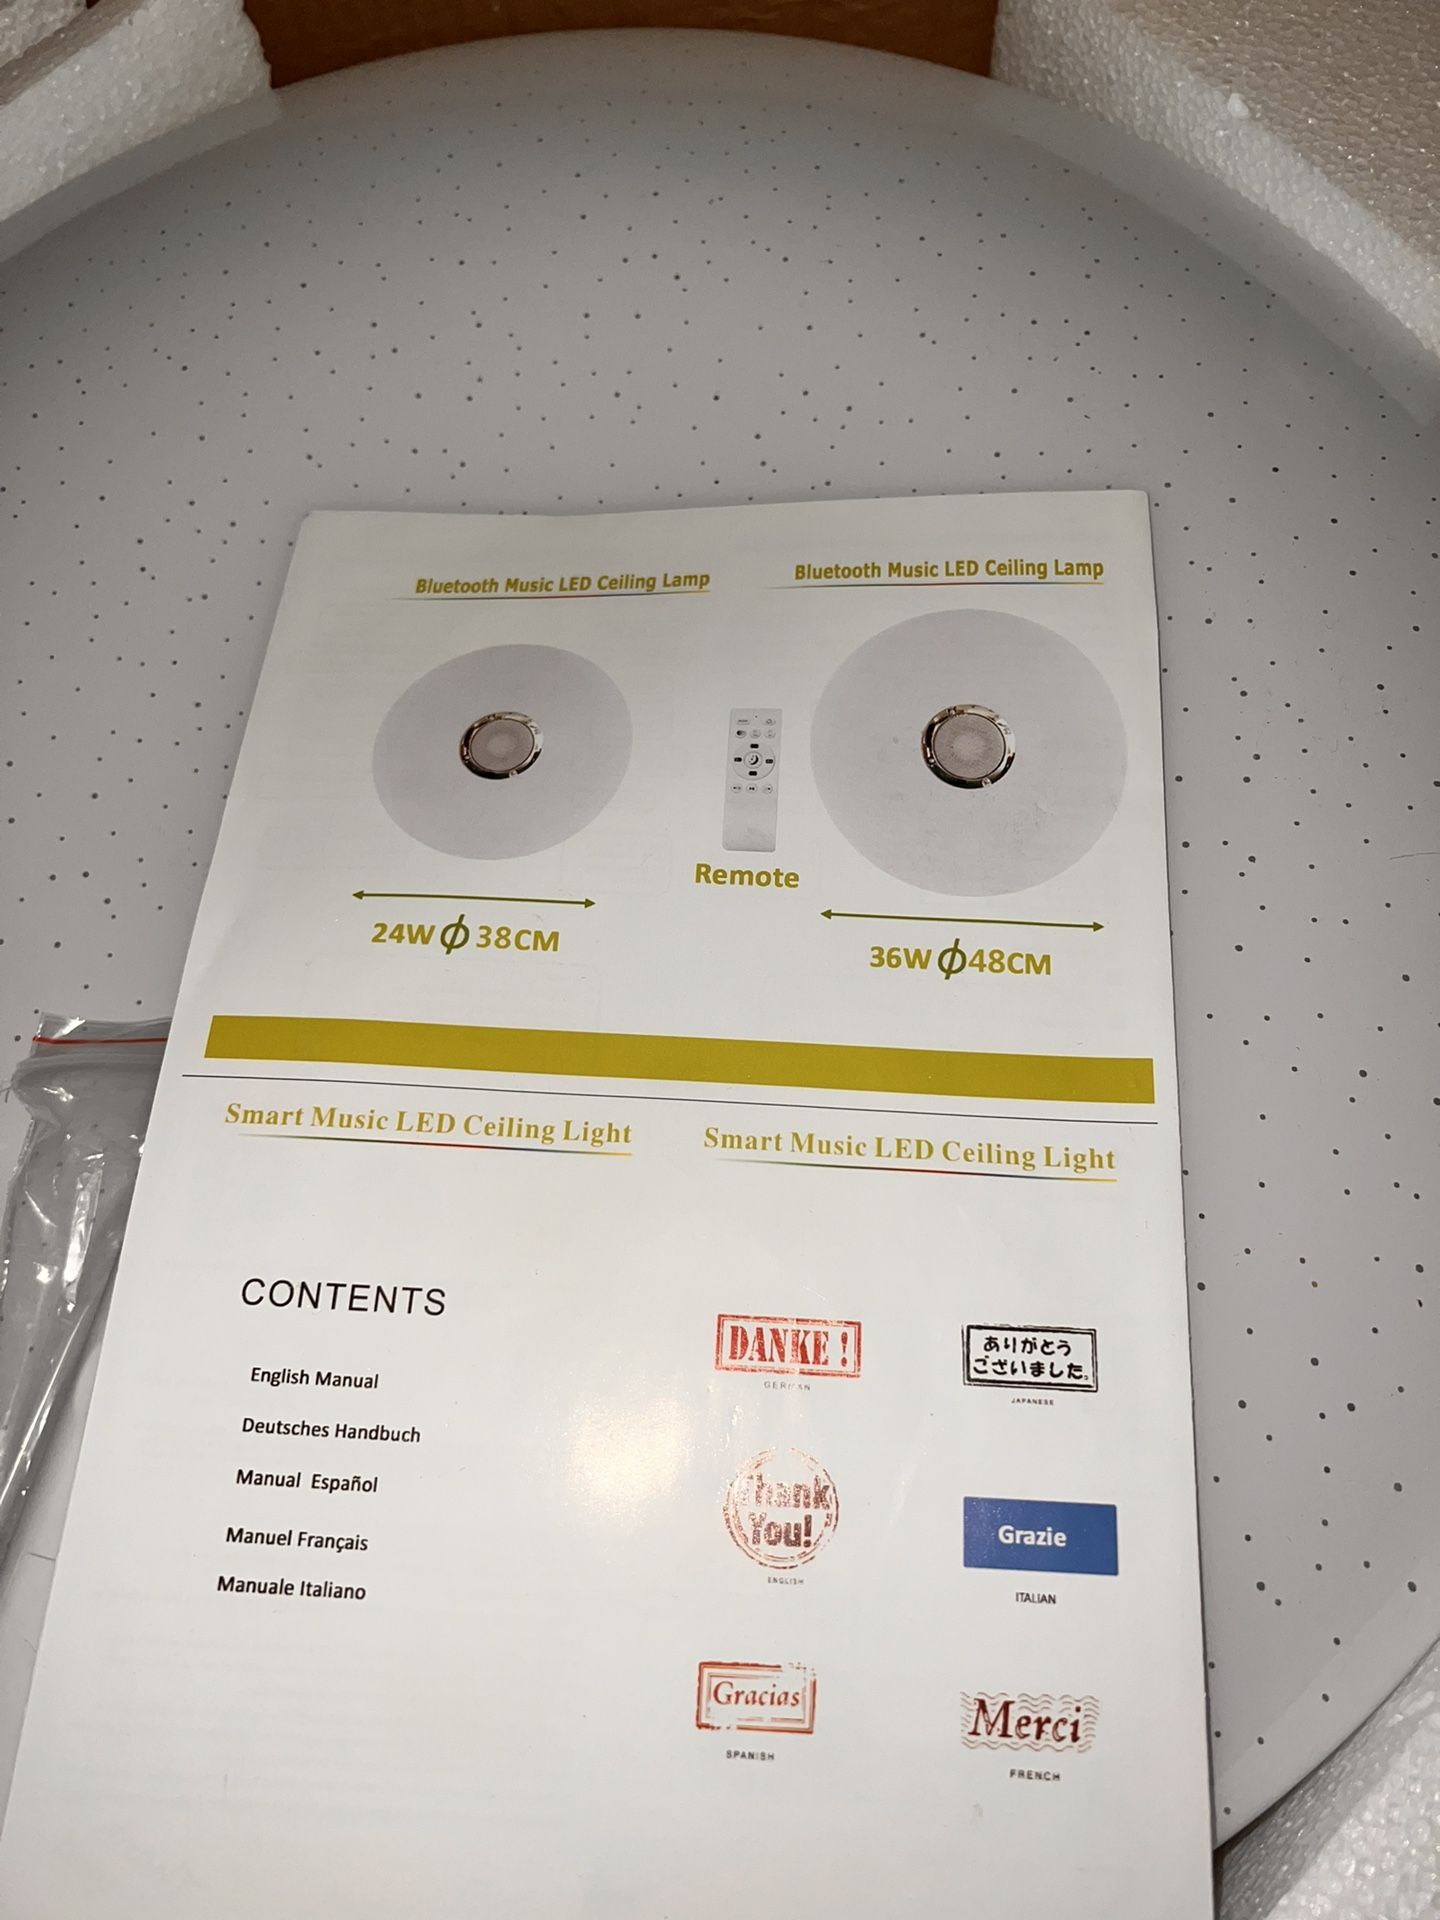 Bluetooth/LED Celling Lamp 